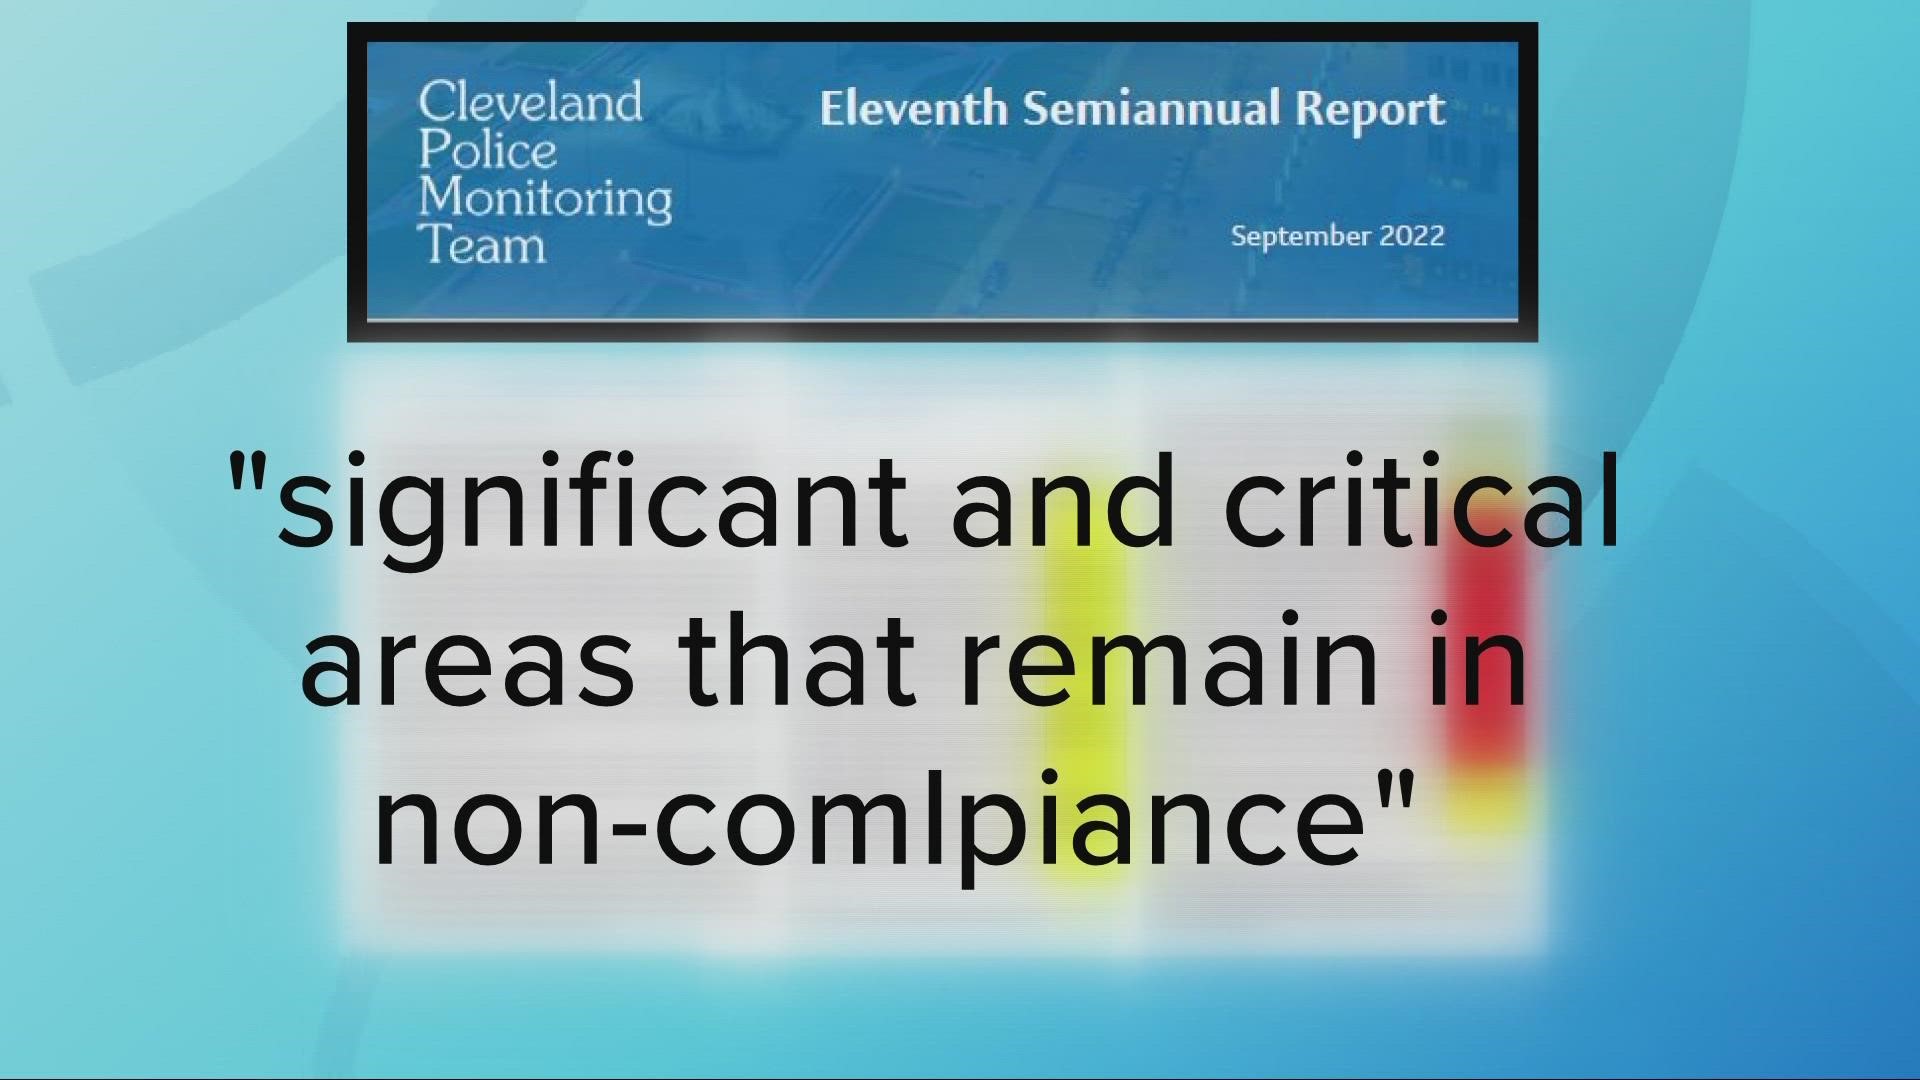 The report details slowly evolving 'significant and critical areas of the consent decree that remain in non-compliance,' including accountability and transparency.